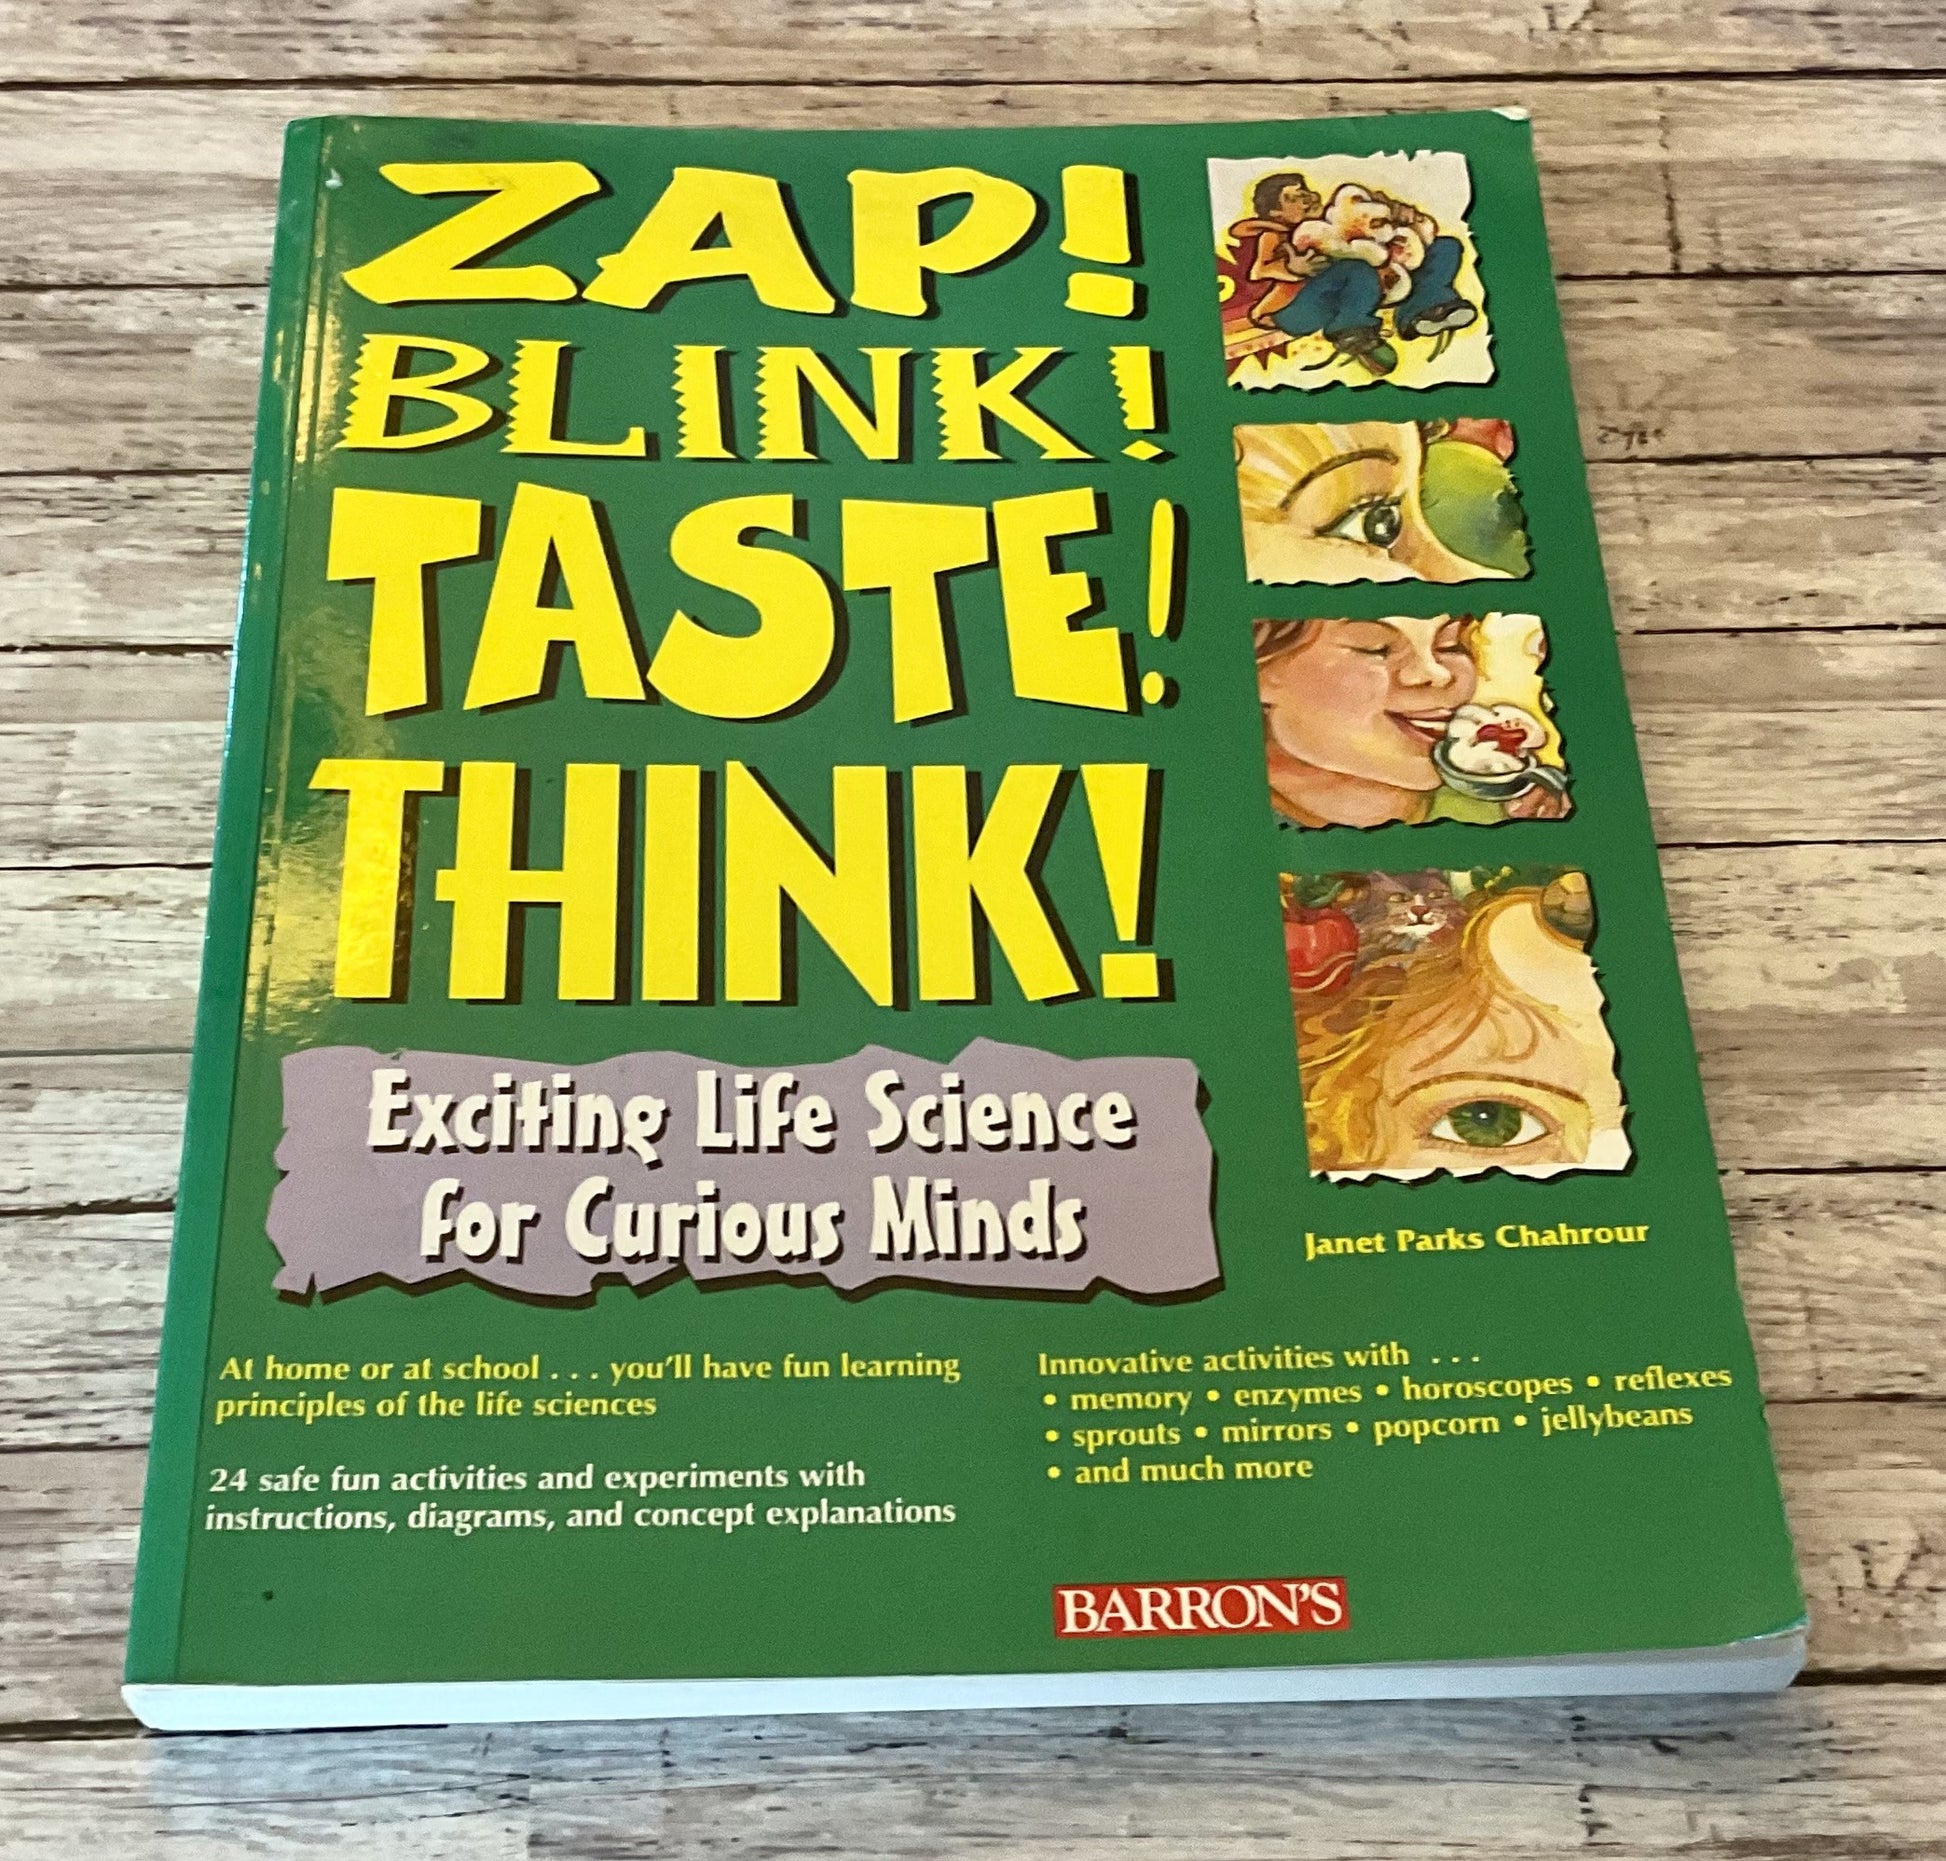 Zap! Blink! Taste! Think! Exciting Life Science for Curious Minds* - Anchored Homeschool Resource Center